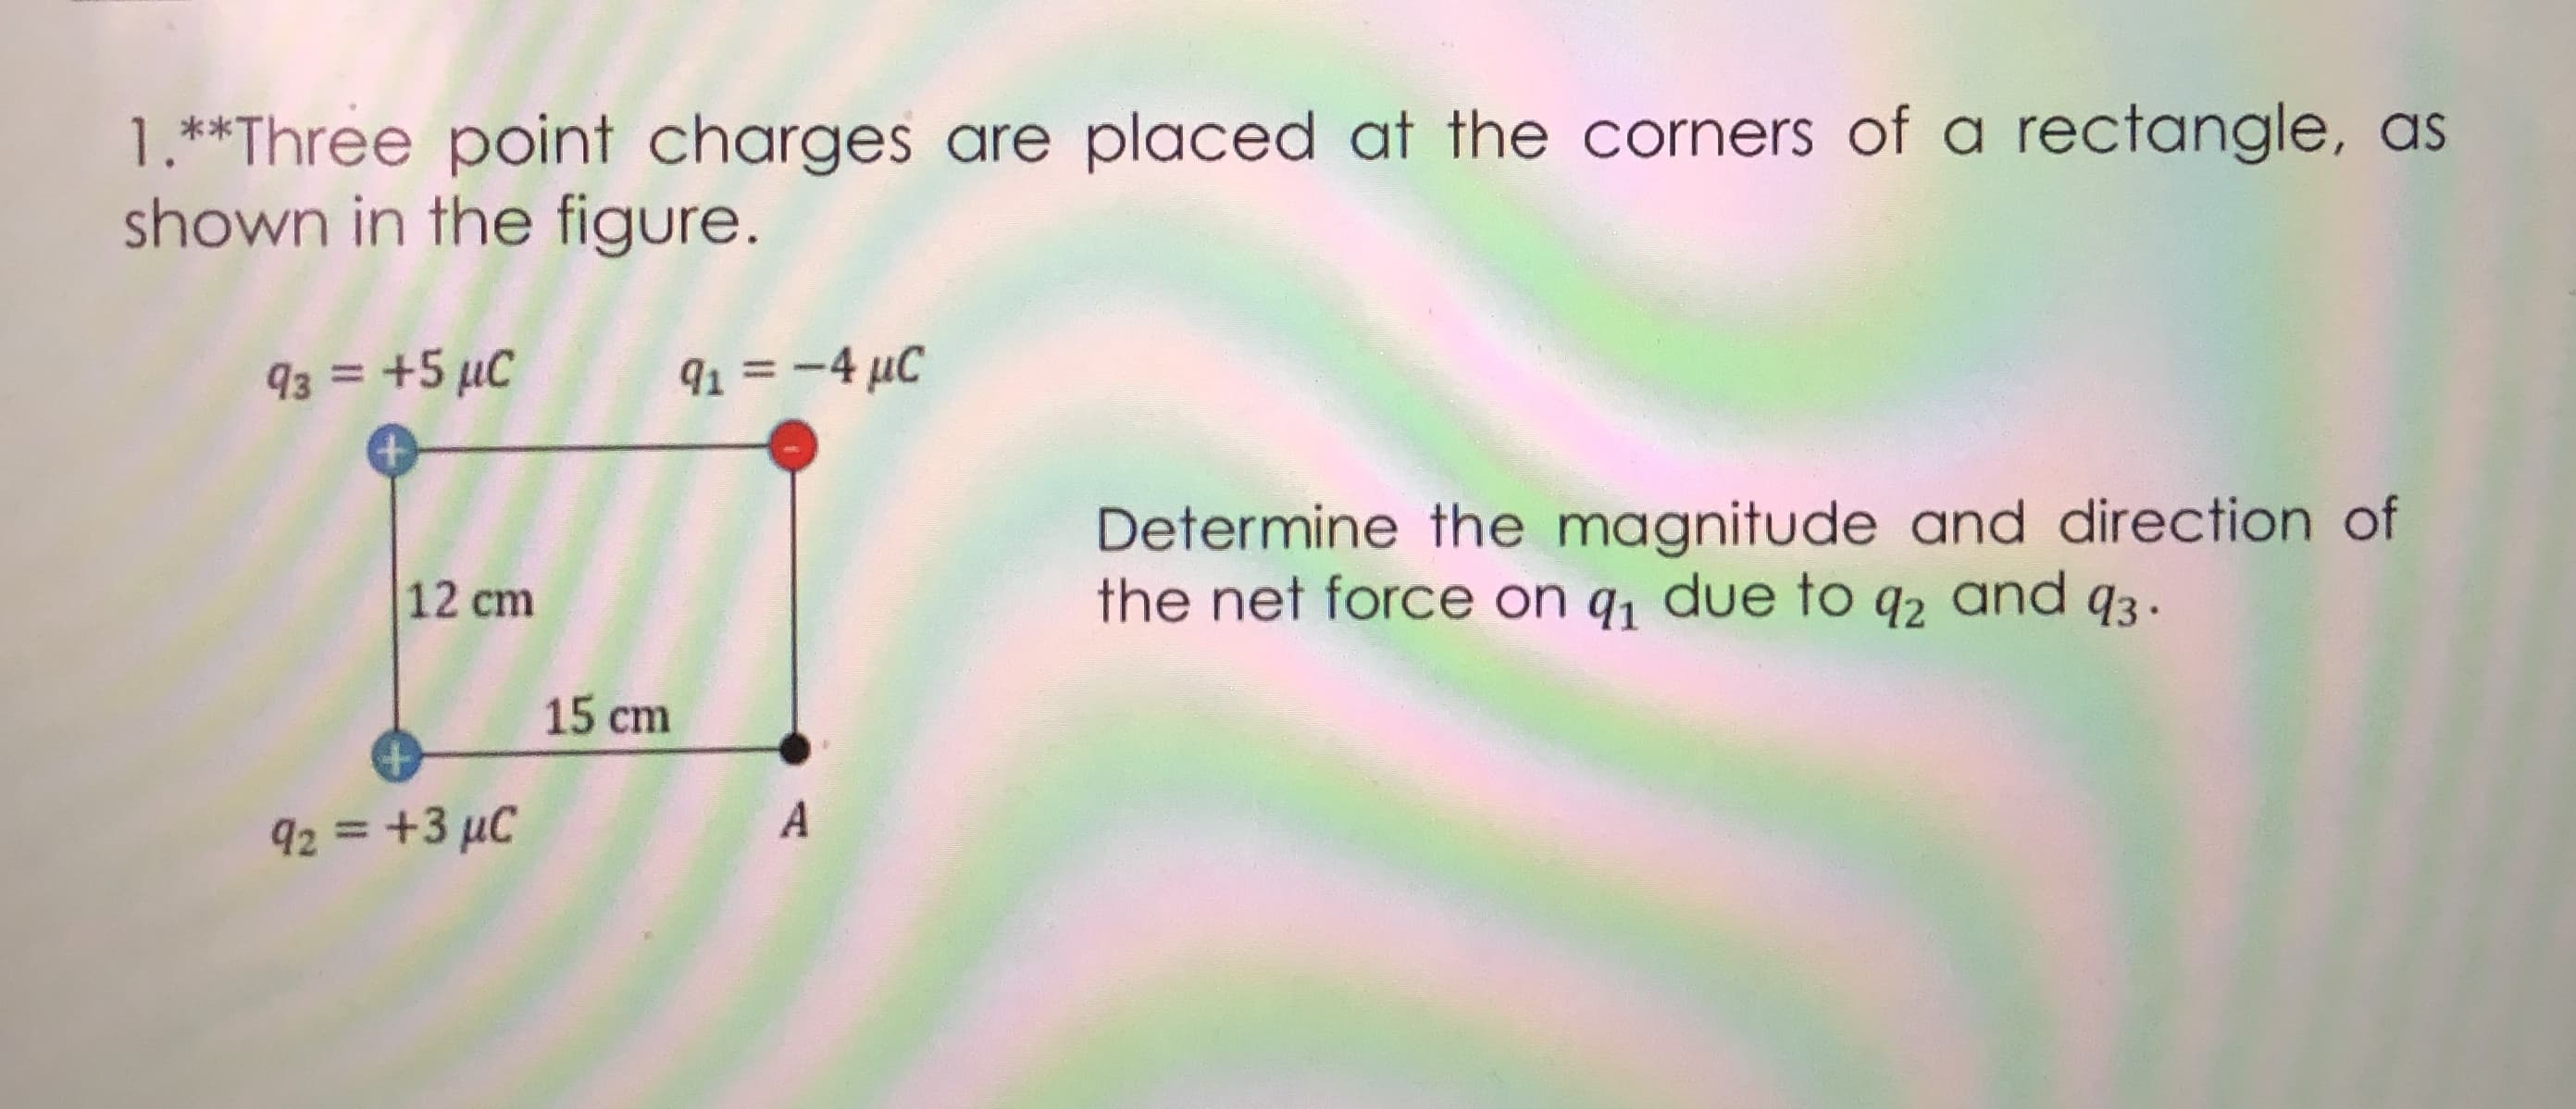 1.**Three point charges are placed at the corners of a rectangle, as
shown in the figure.
93 = +5 µC
91 = -4 µC
Determine the magnitude and direction of
the net force on q, due to q2 and q3.
12 cm
15 cm
A
92 = +3 µC
